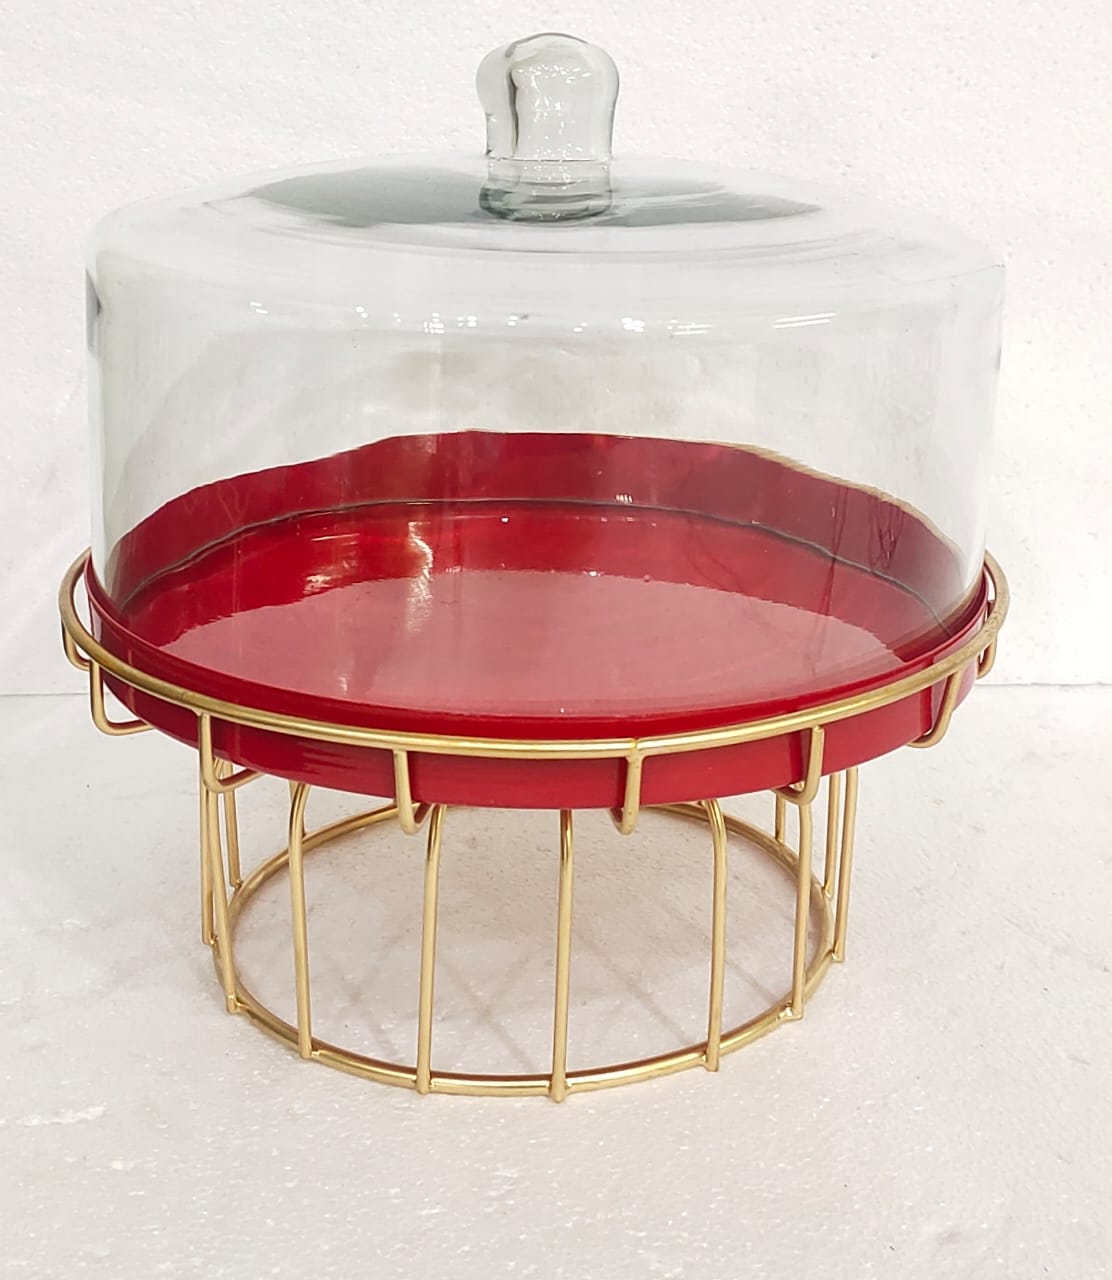 Metal Cake Stand with Glass Top, Green and Gold